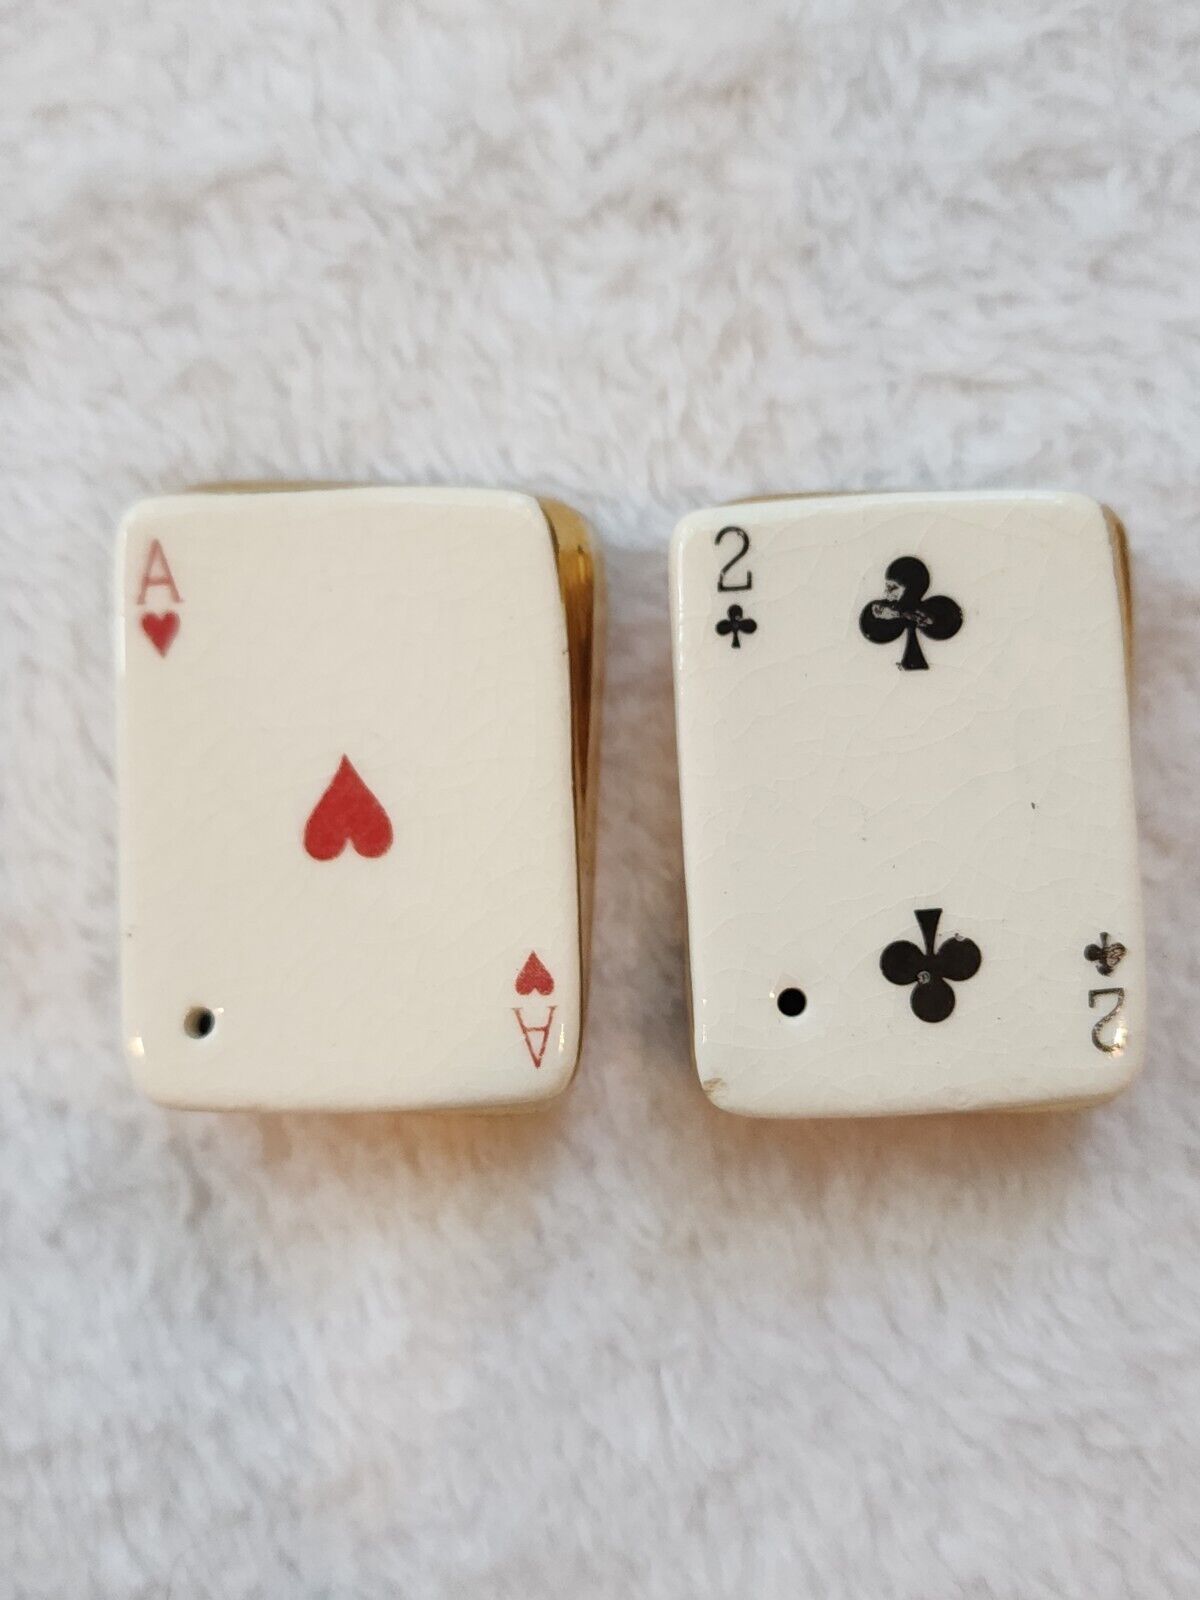 Vintage Arcadia Miniature Salt and Pepper Shakers Playing Cards